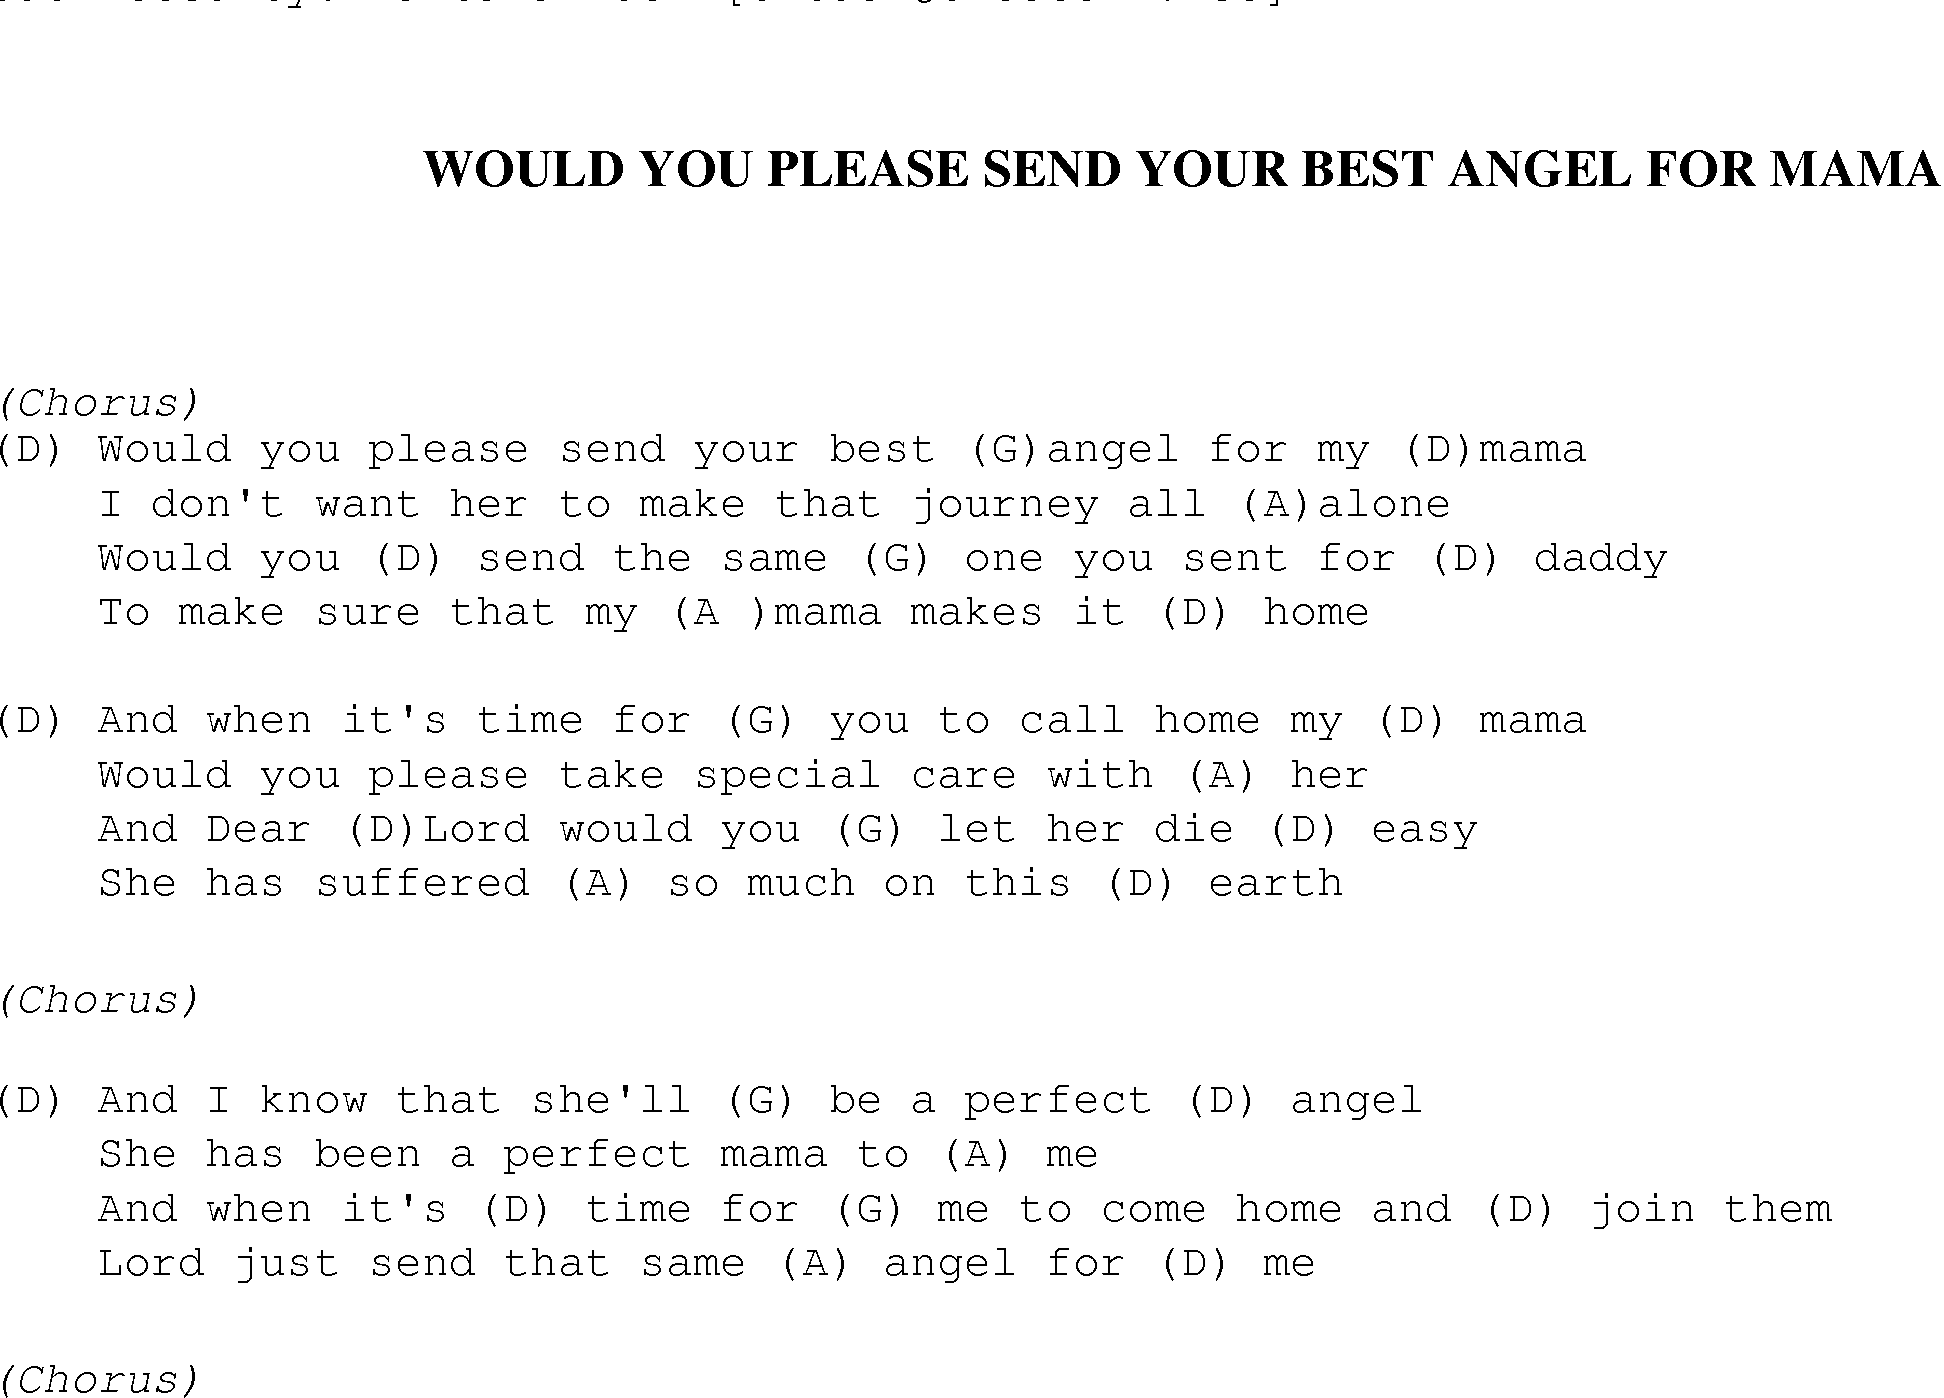 Gospel Song: would_you_send_your_best_angel, lyrics and chords.